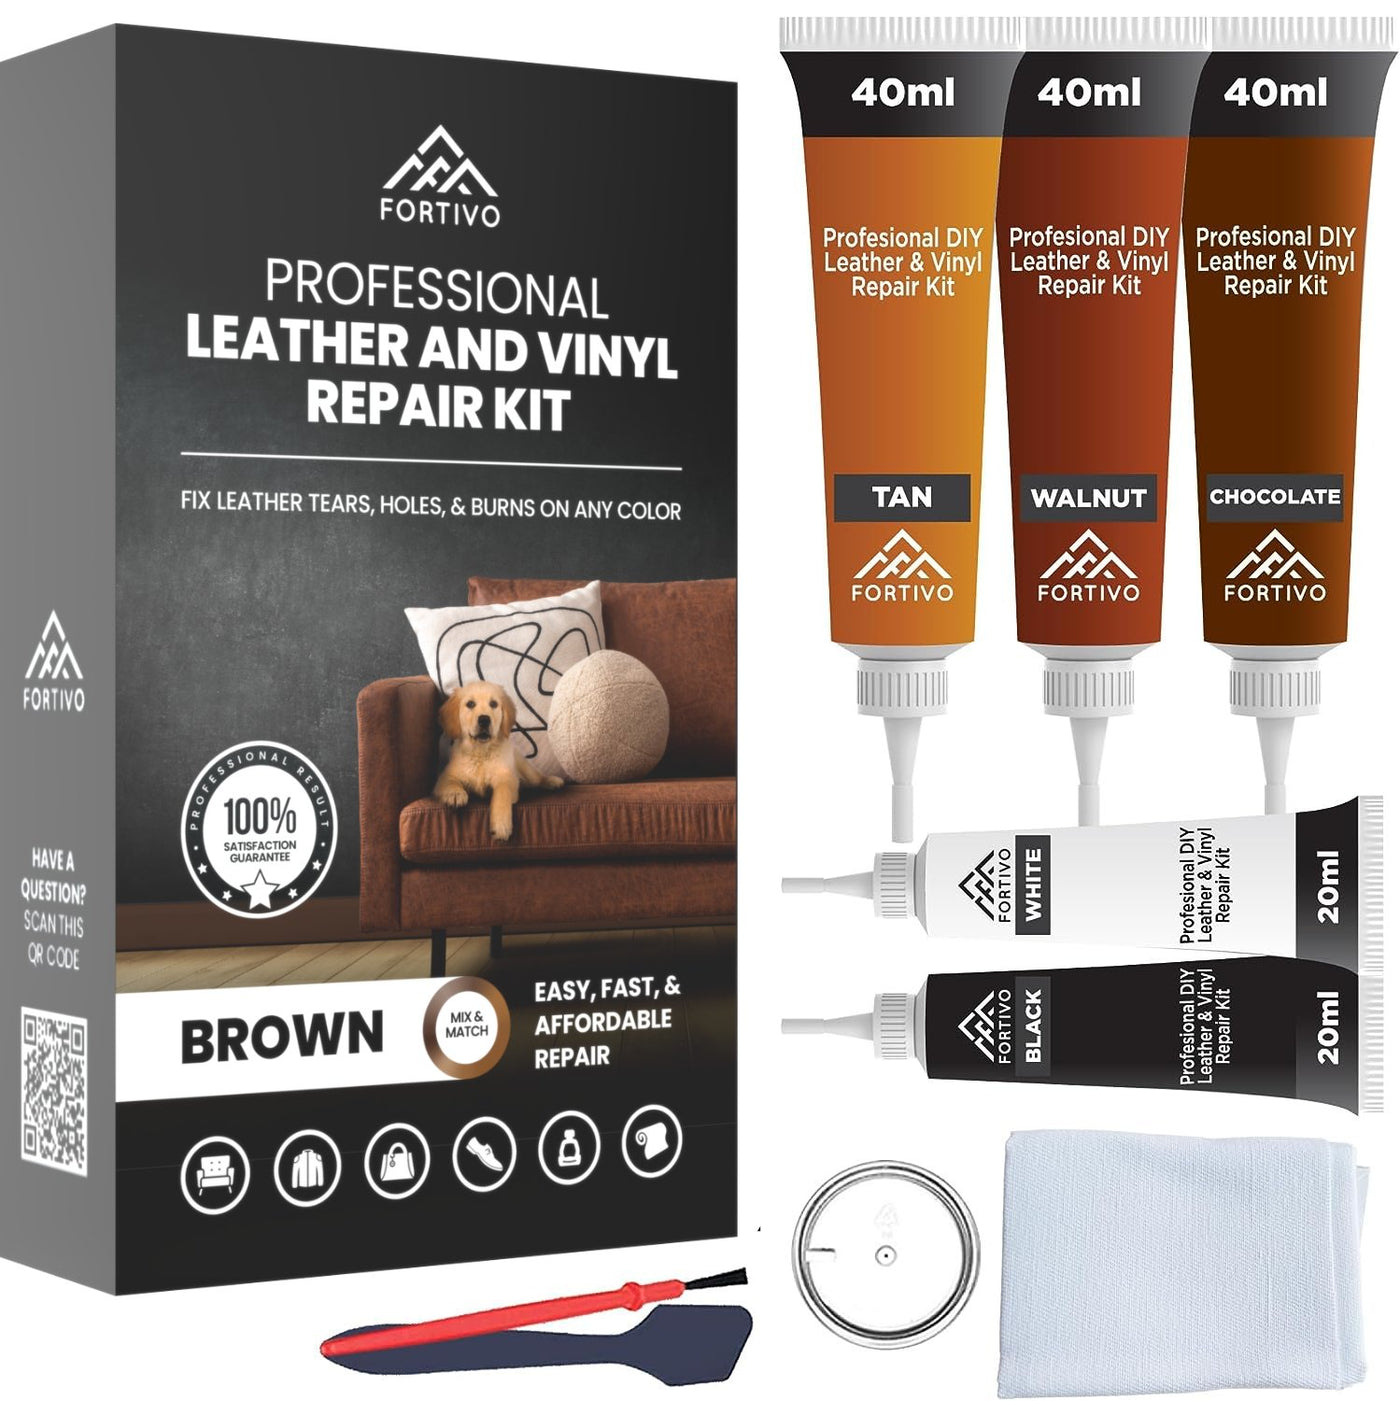 FORTIVO Black Leather Leather Repair Kit for Furniture, Leather